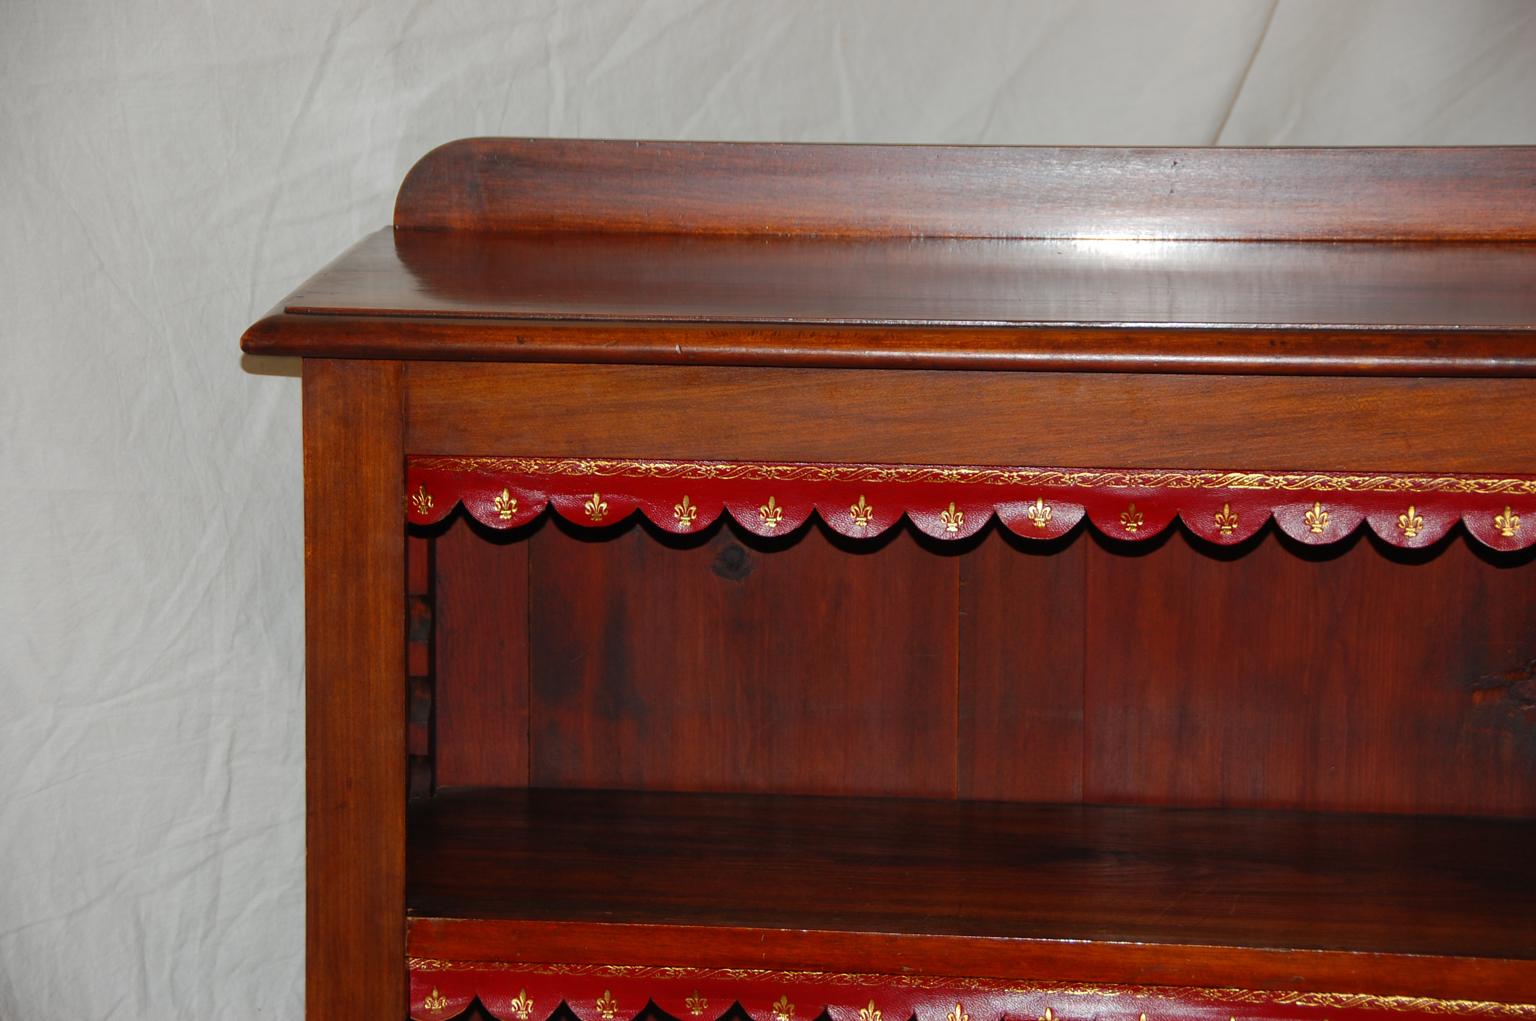 English Victorian period mahogany bookcase with three adjustable shelves. The edges are enhanced by red tooled leather edgings. These are removable if desired. The leather is replaced and hand tooled. It was copied from the original leather edgings